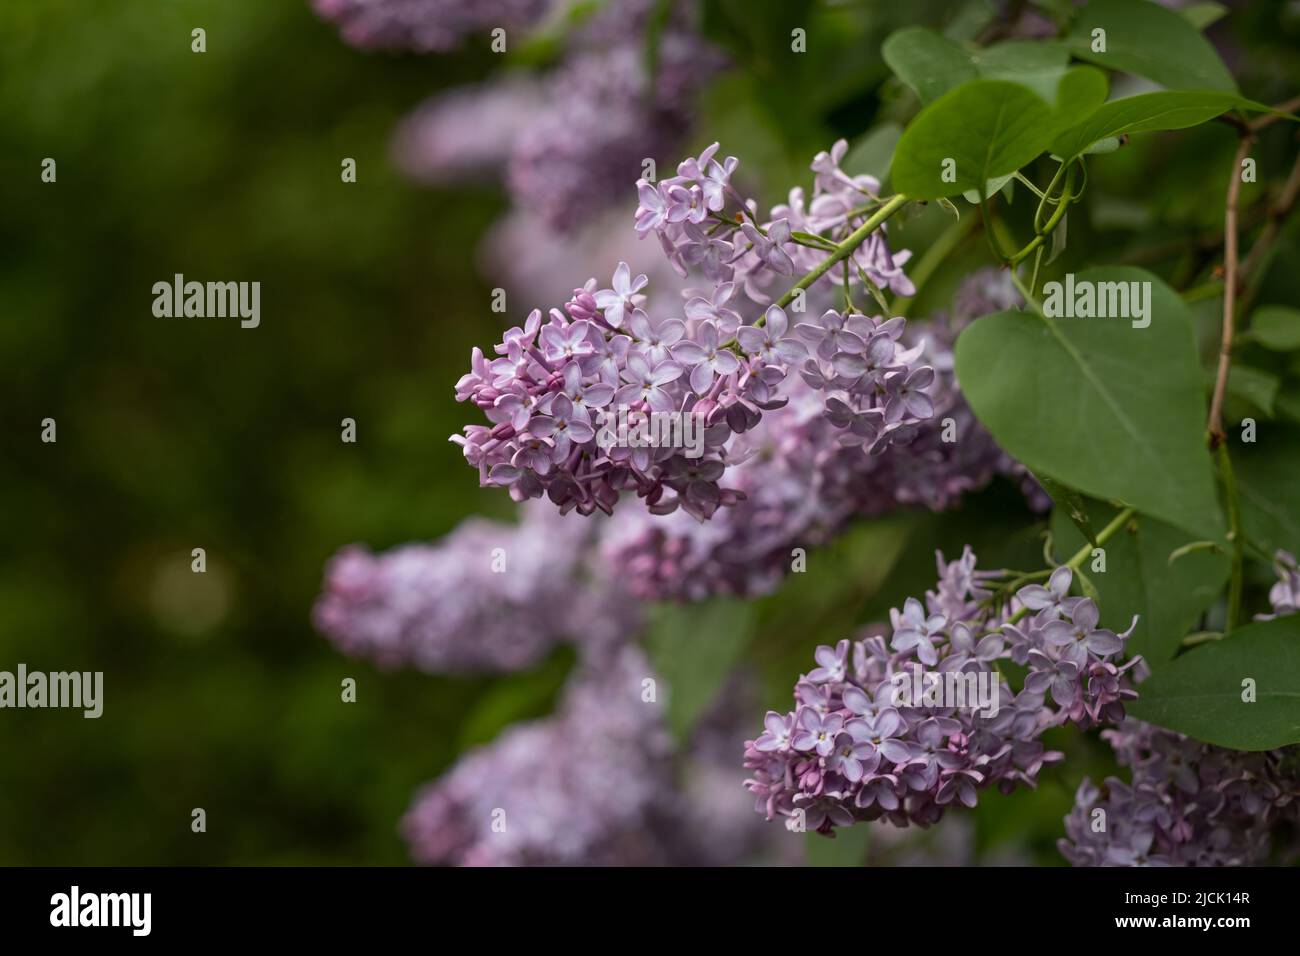 Blooming lilac bush flowers, garden in the spring Stock Photo